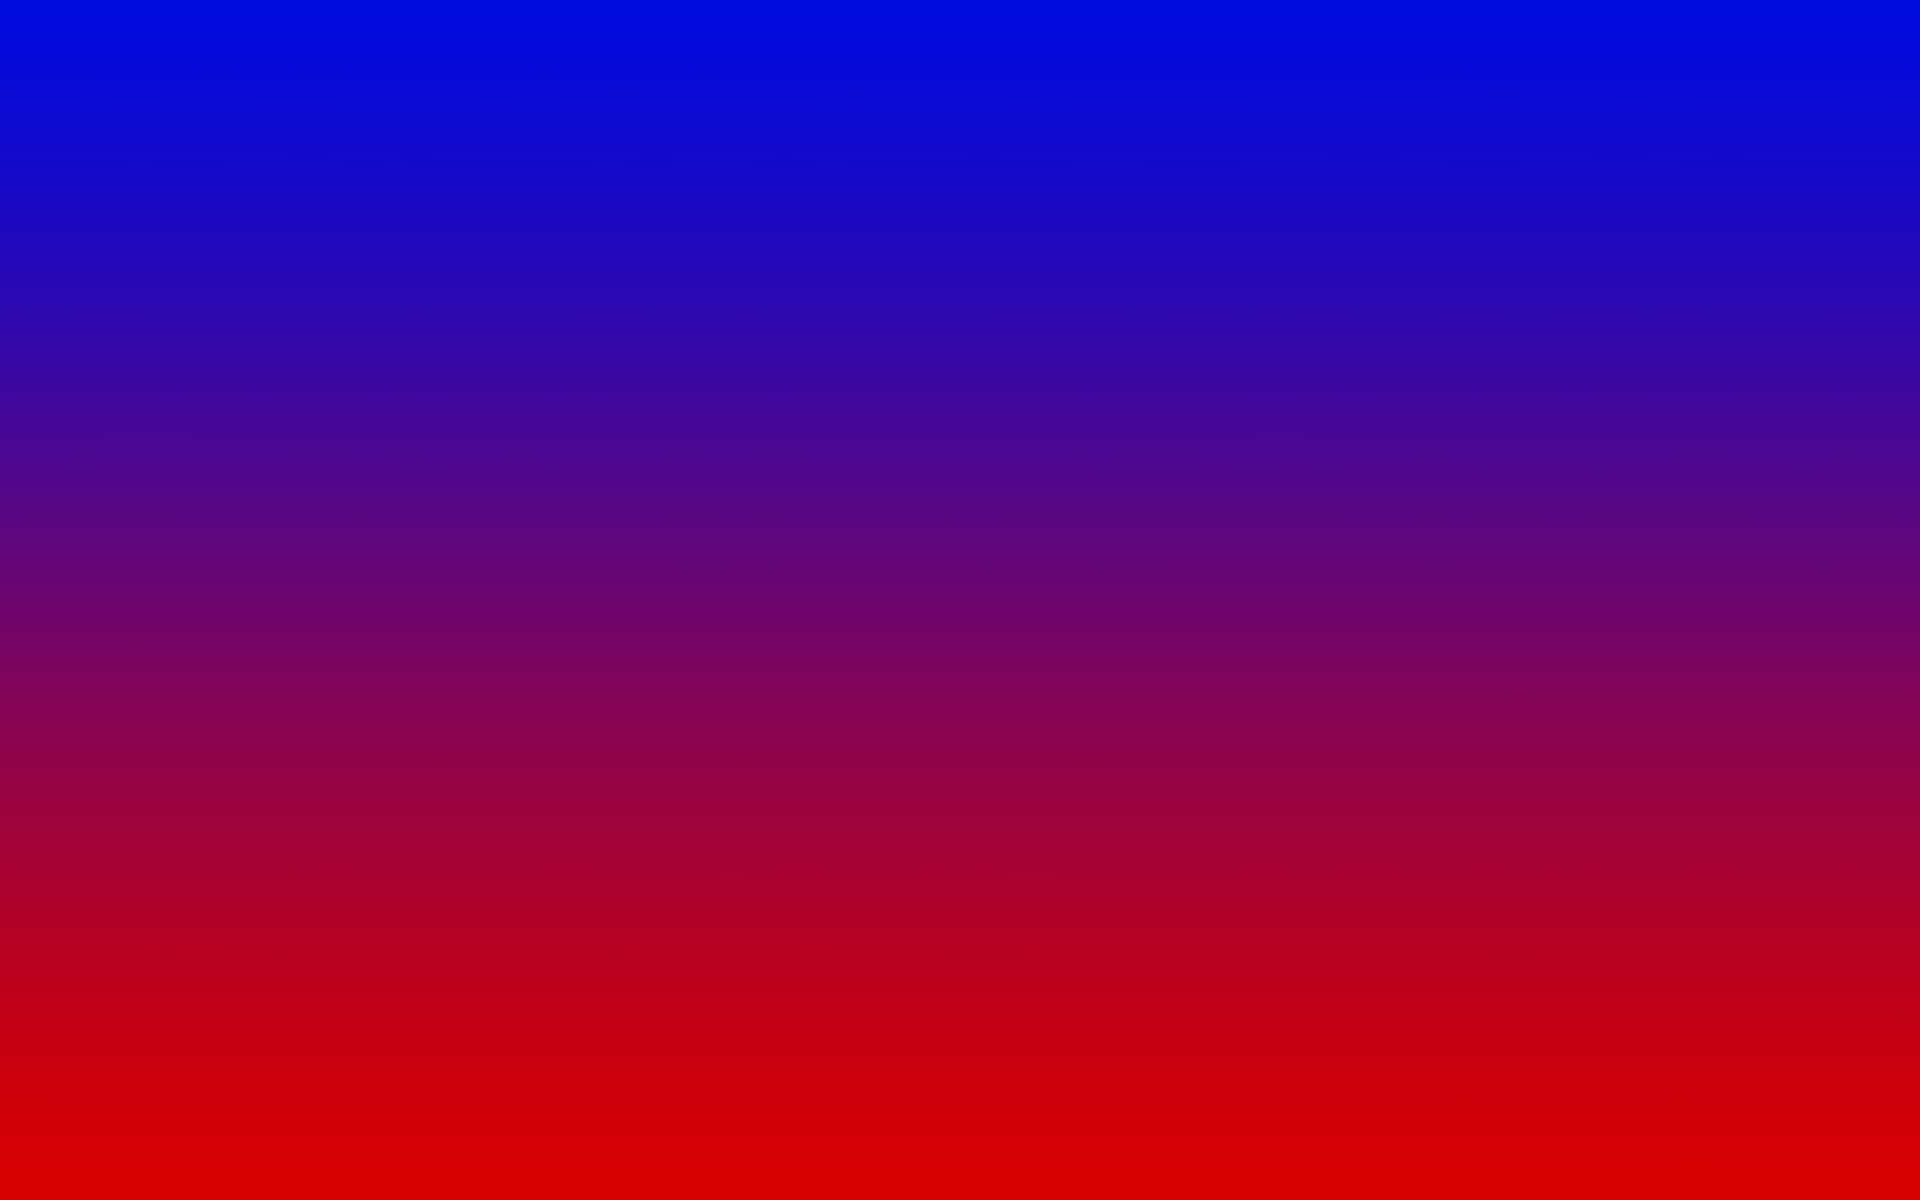 Gradient Blue And Red Background